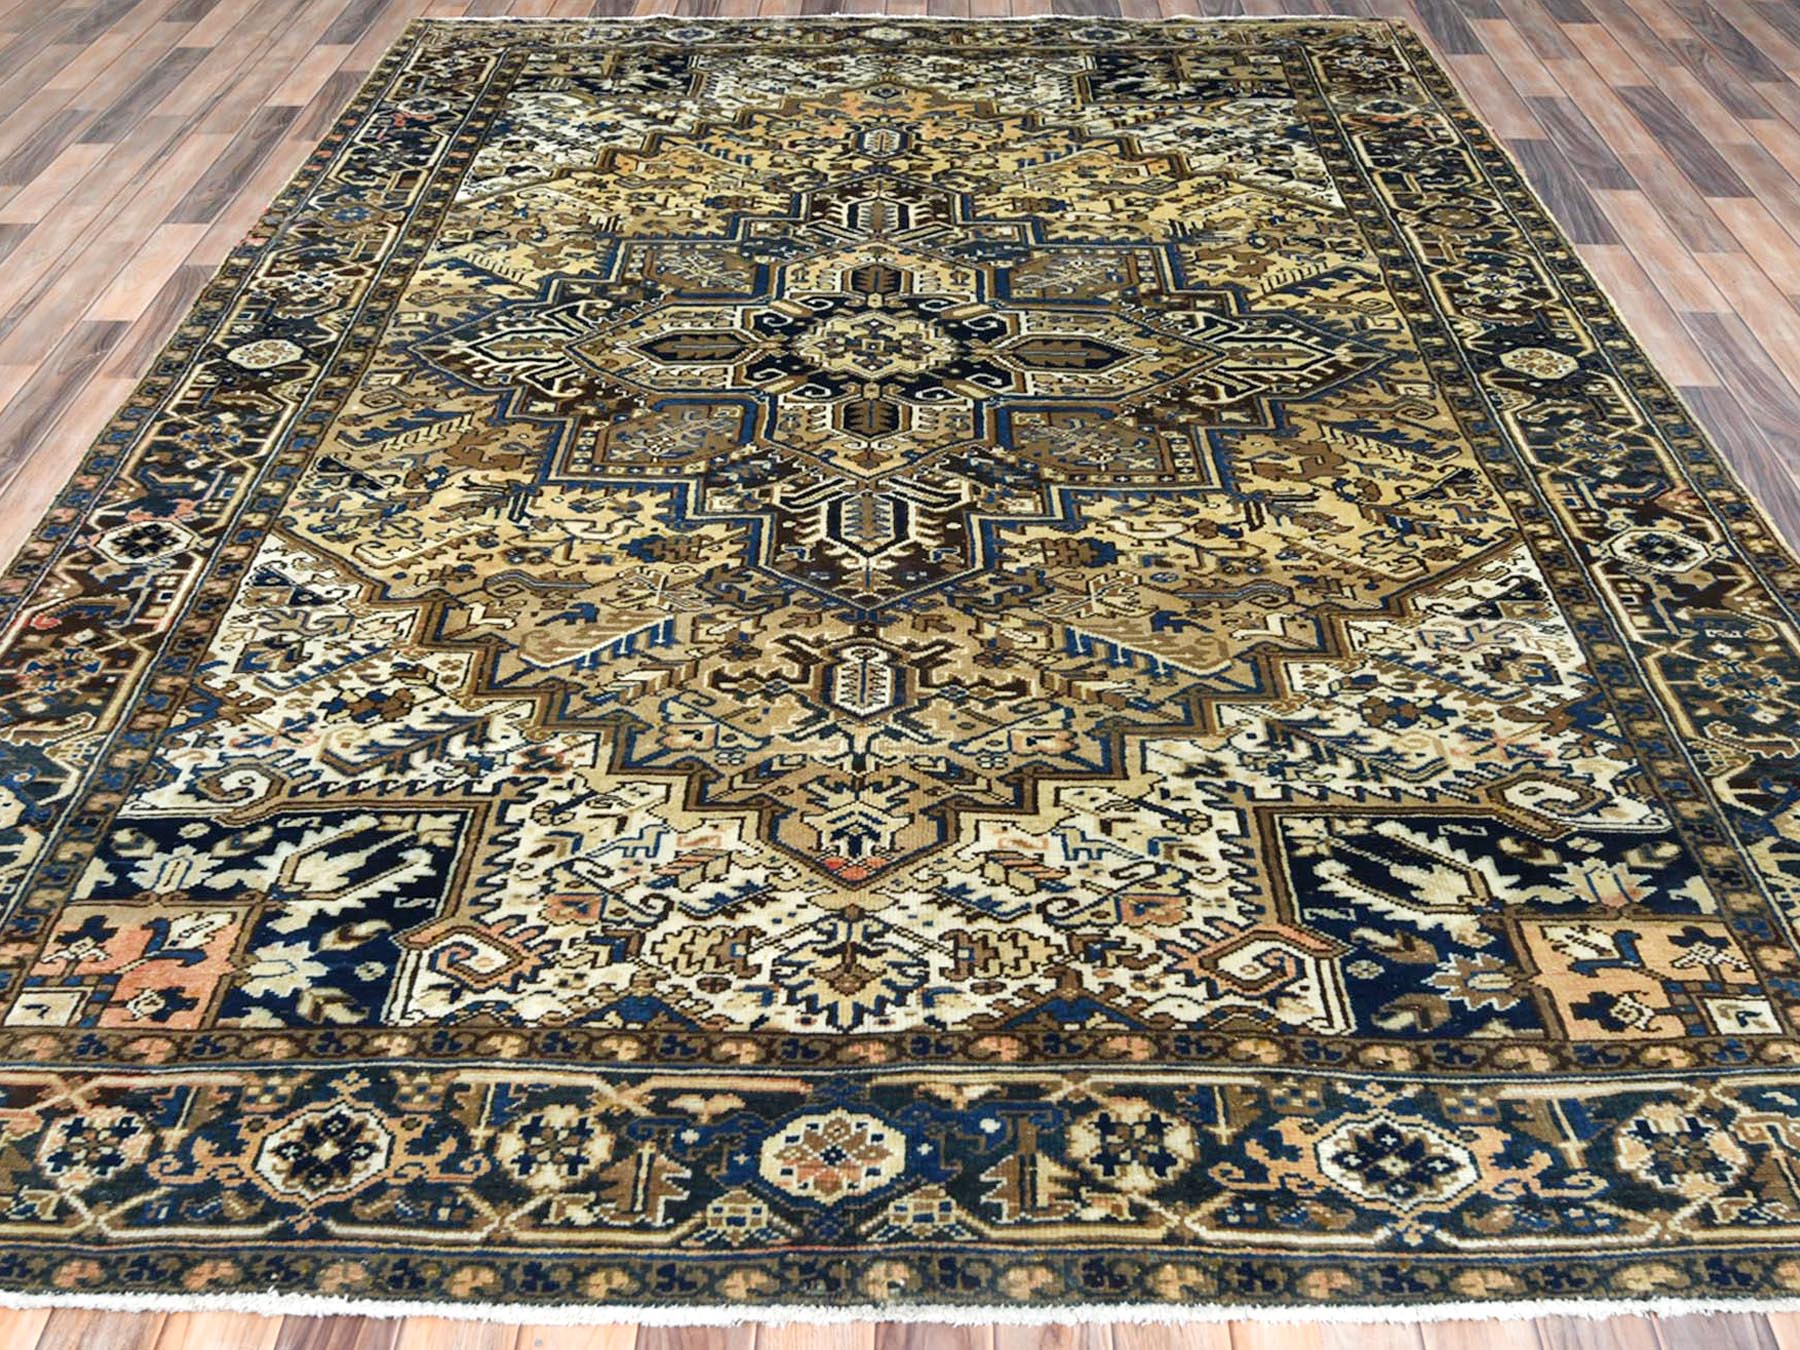 Overdyed & Vintage Rugs LUV731124